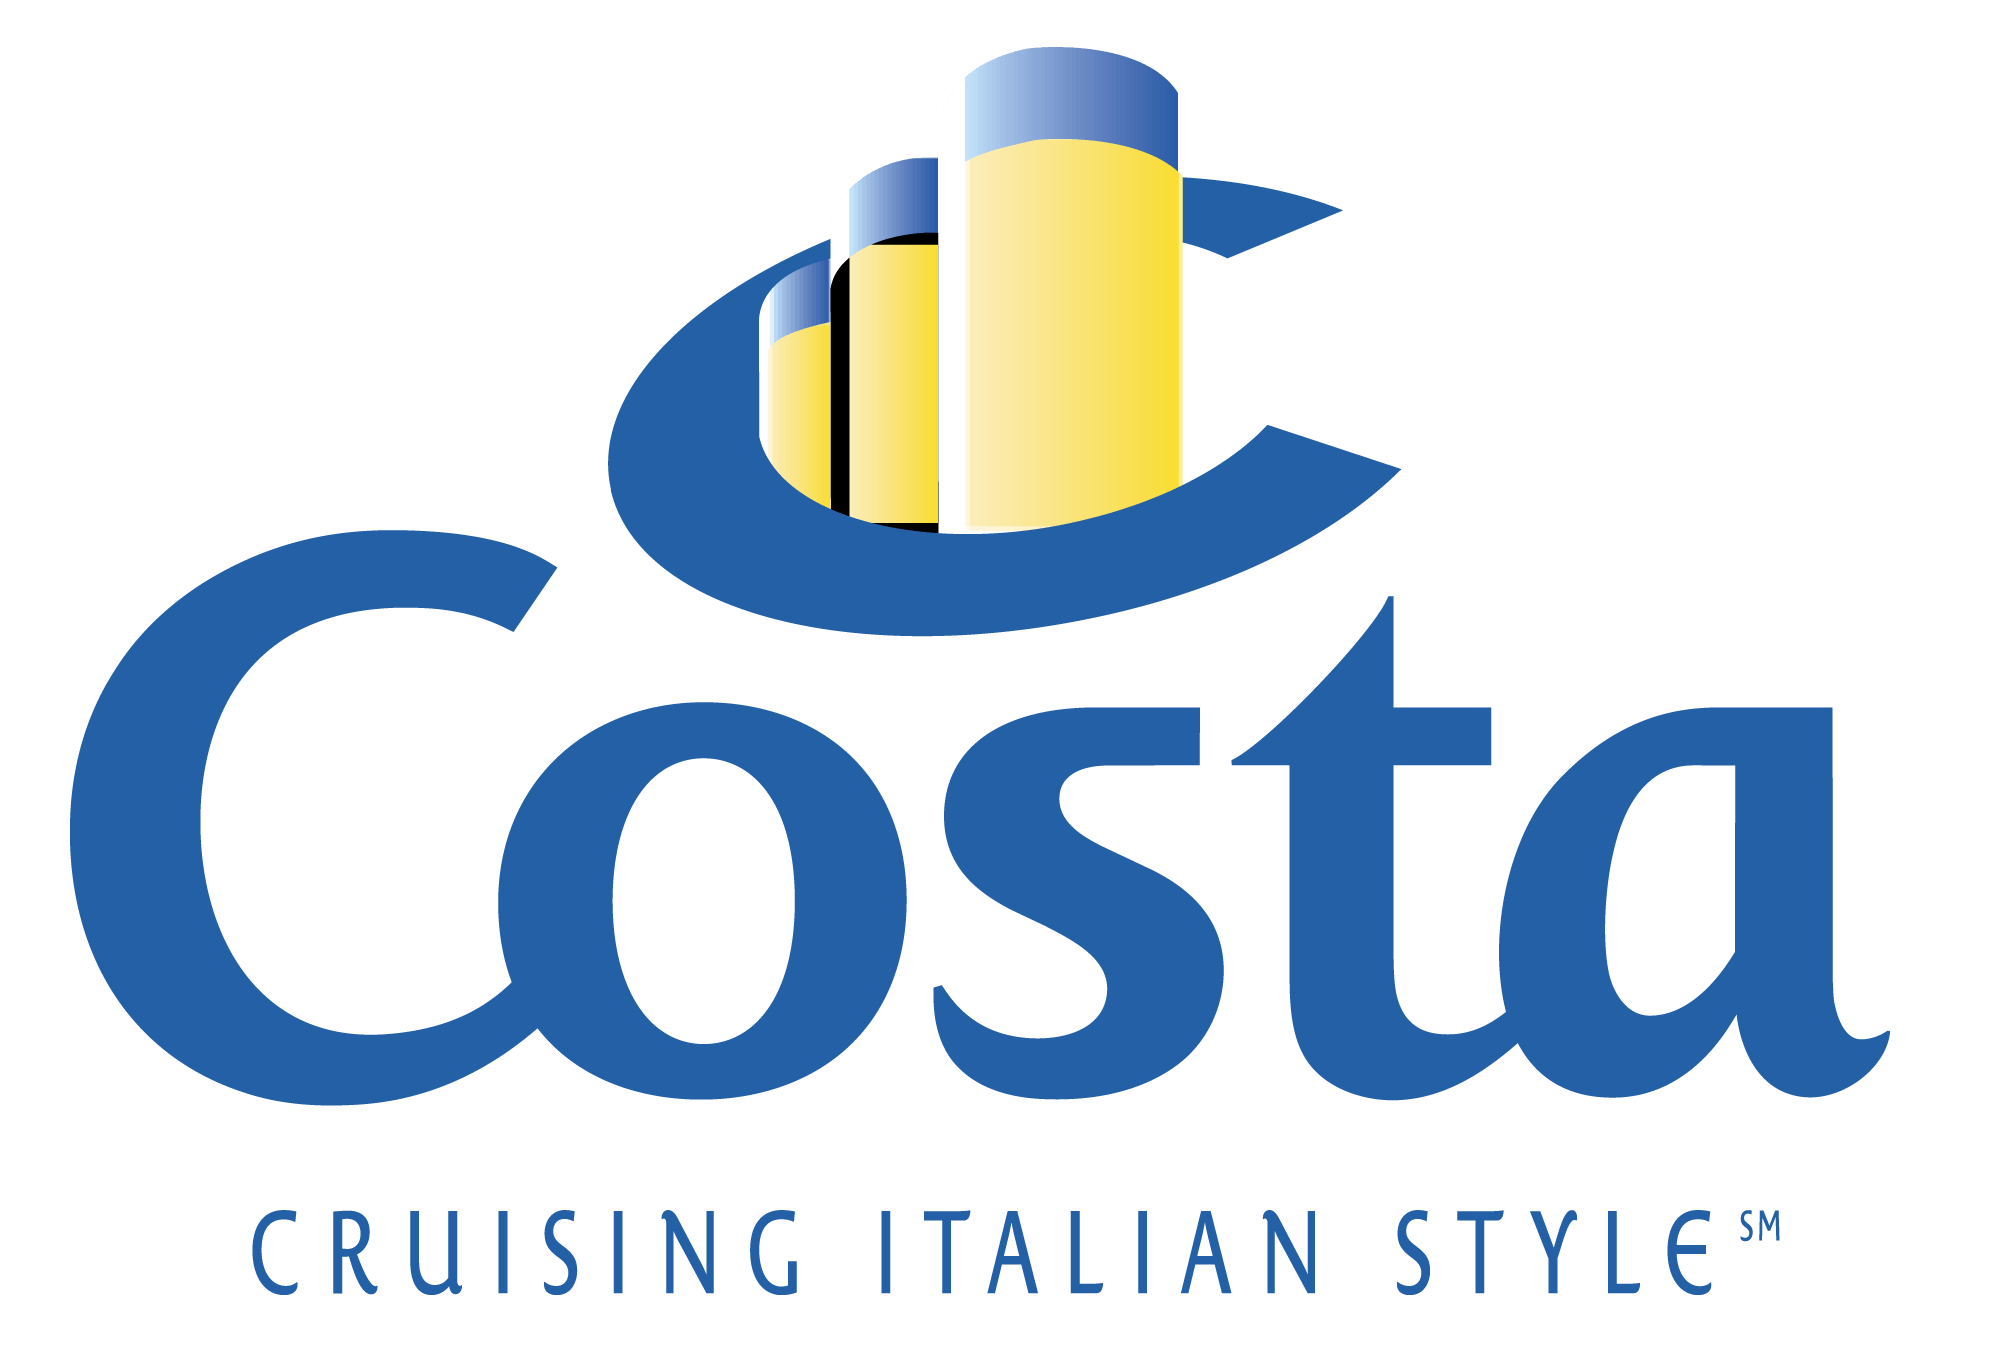 Crusie Logo - Meaning Costa logo and symbol | history and evolution